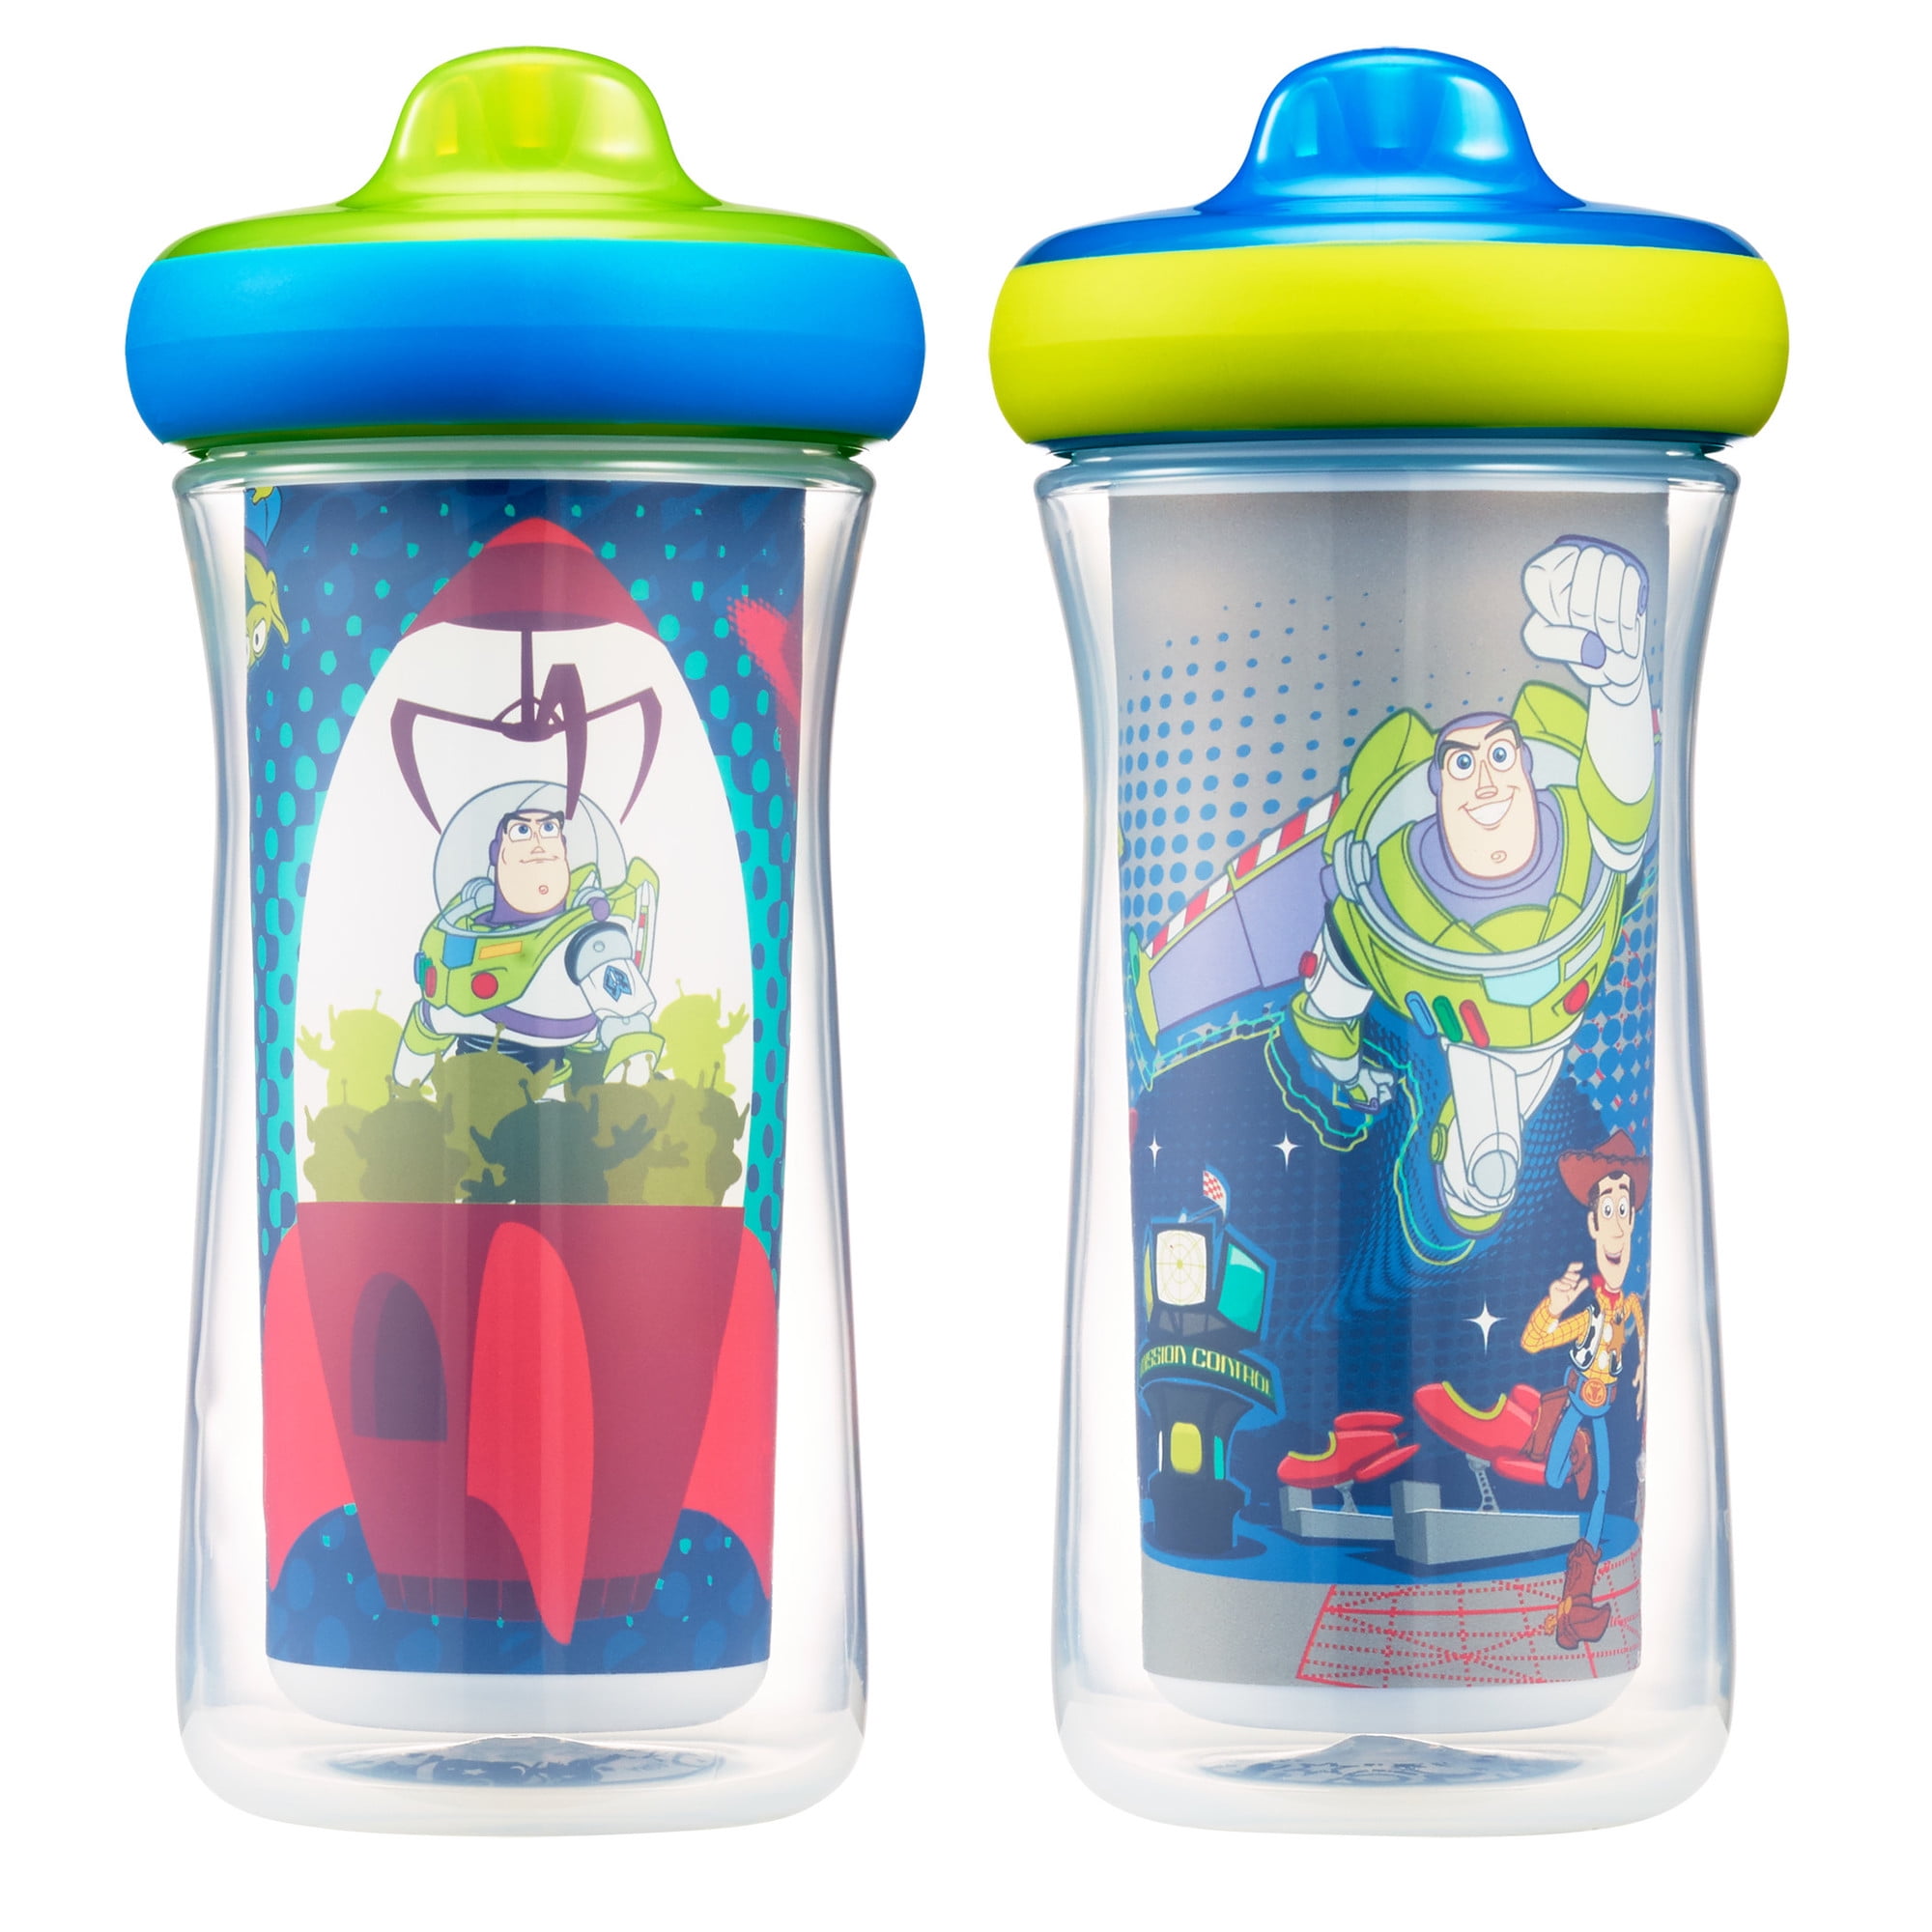 Toy Story Sippy Cup, 9 Ounce